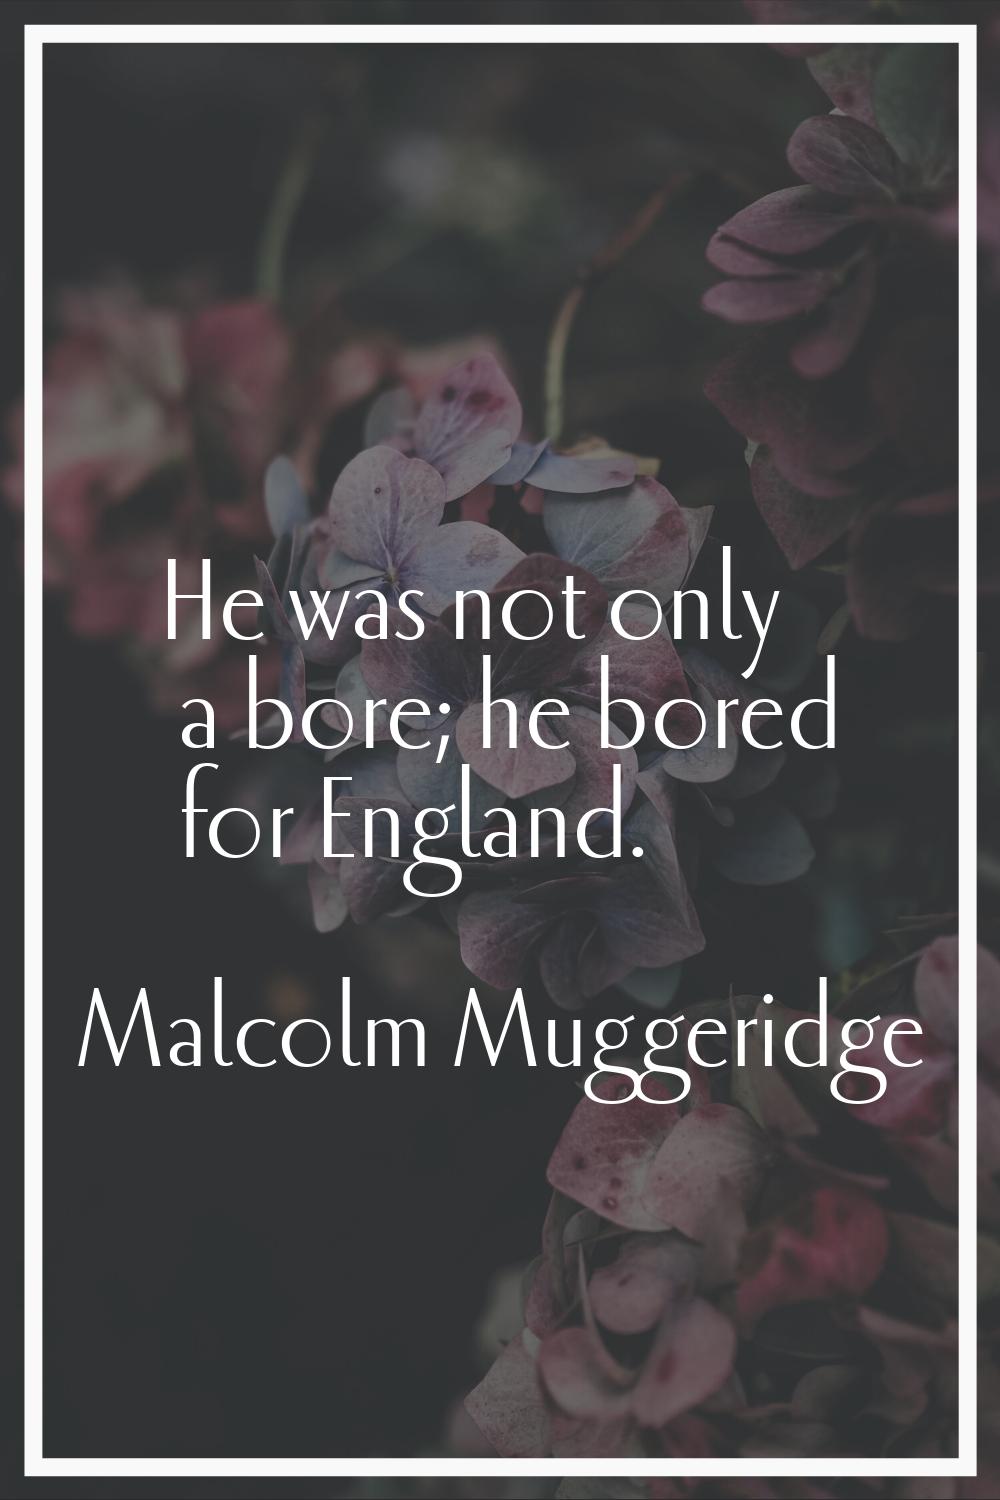 He was not only a bore; he bored for England.